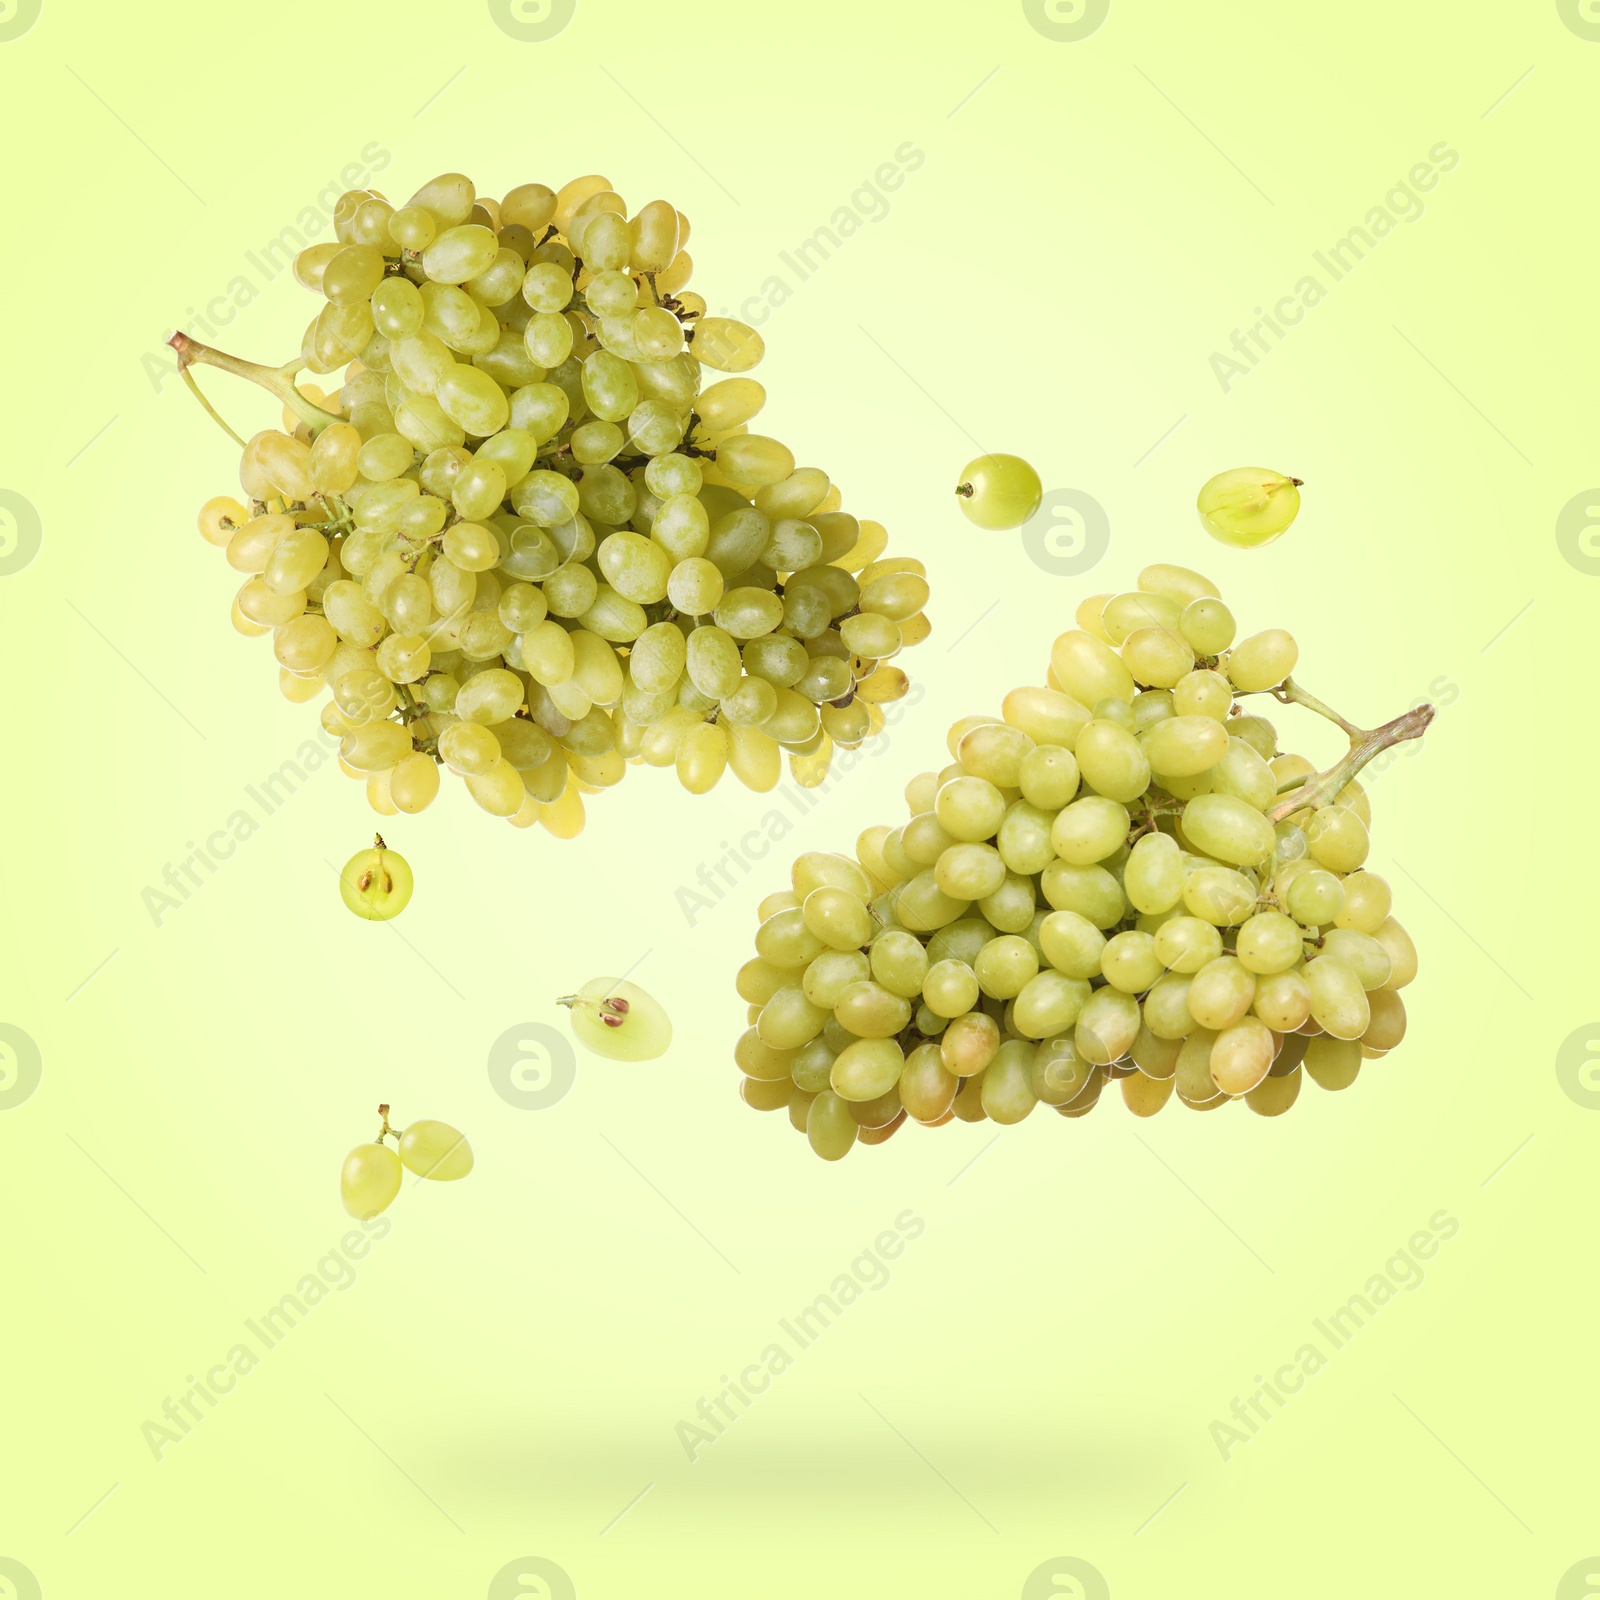 Image of Fresh grapes in air on light green background